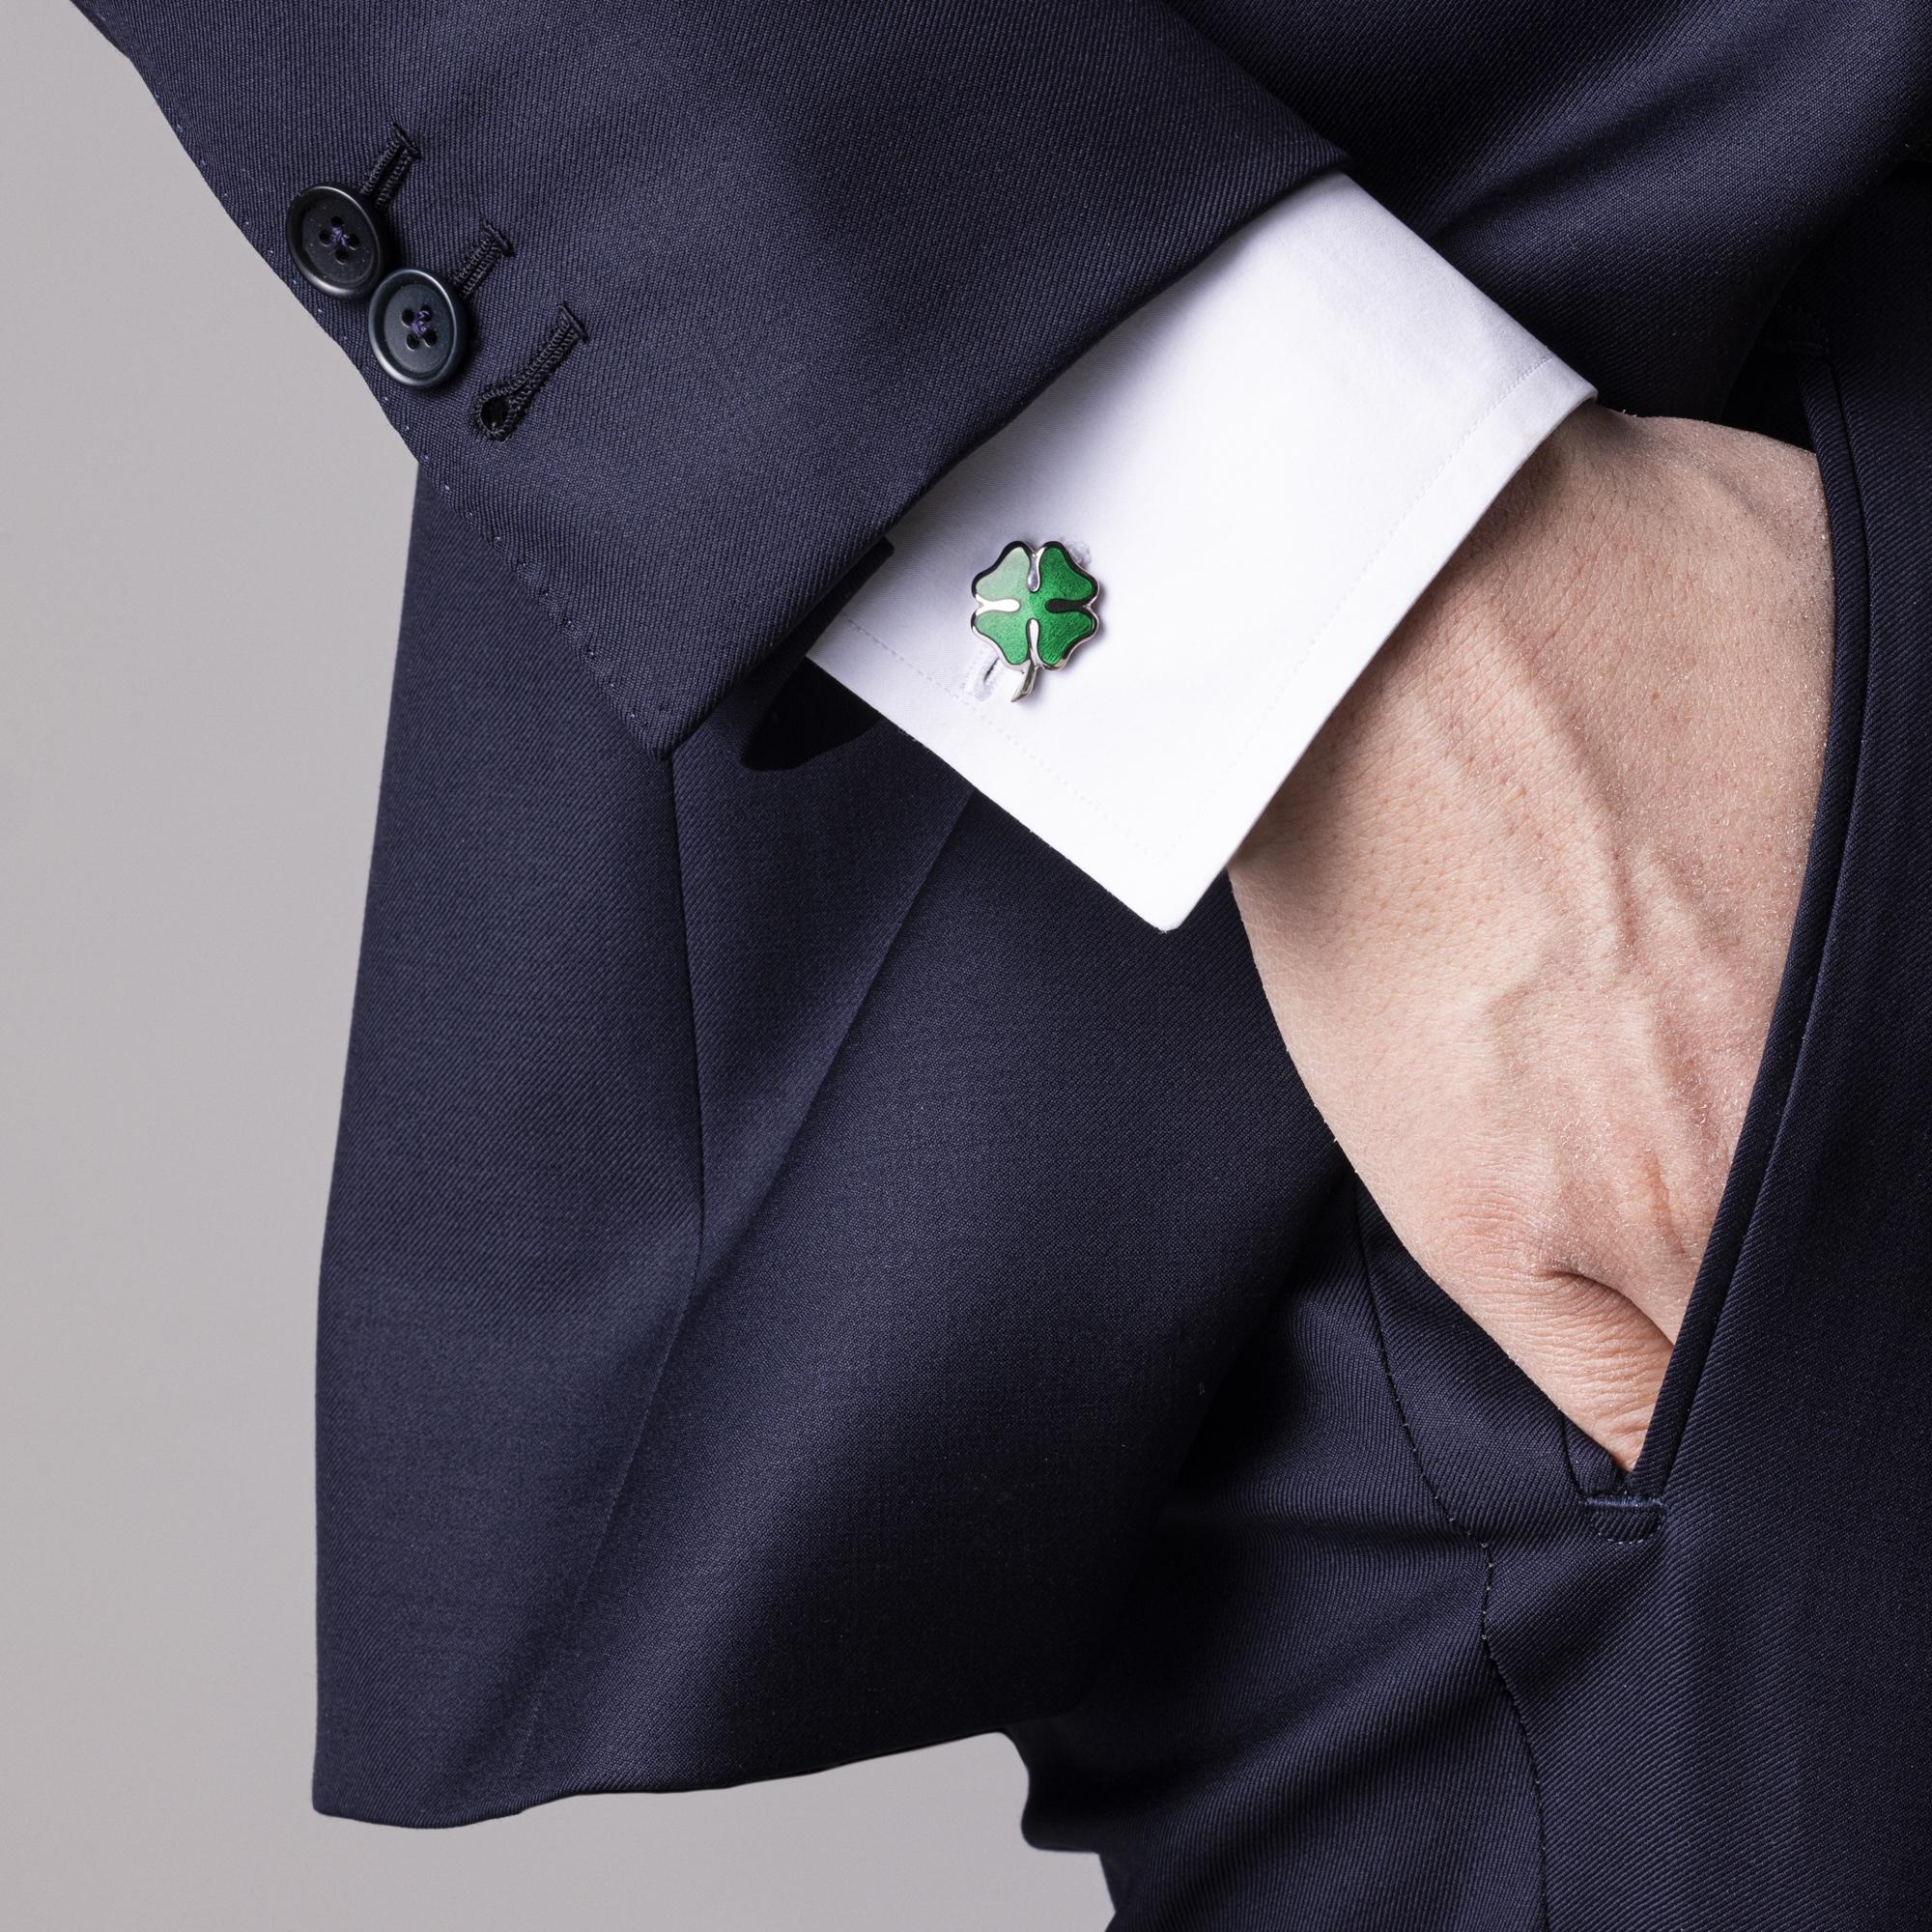 Alex Jona design collection, hand crafted in Italy, rhodium plated Sterling Silver lucky clover cufflinks with green enamel. These cufflinks feature a T-Bar fastening, aiding in easy use and confidence that they'll stay secured to your shirt.